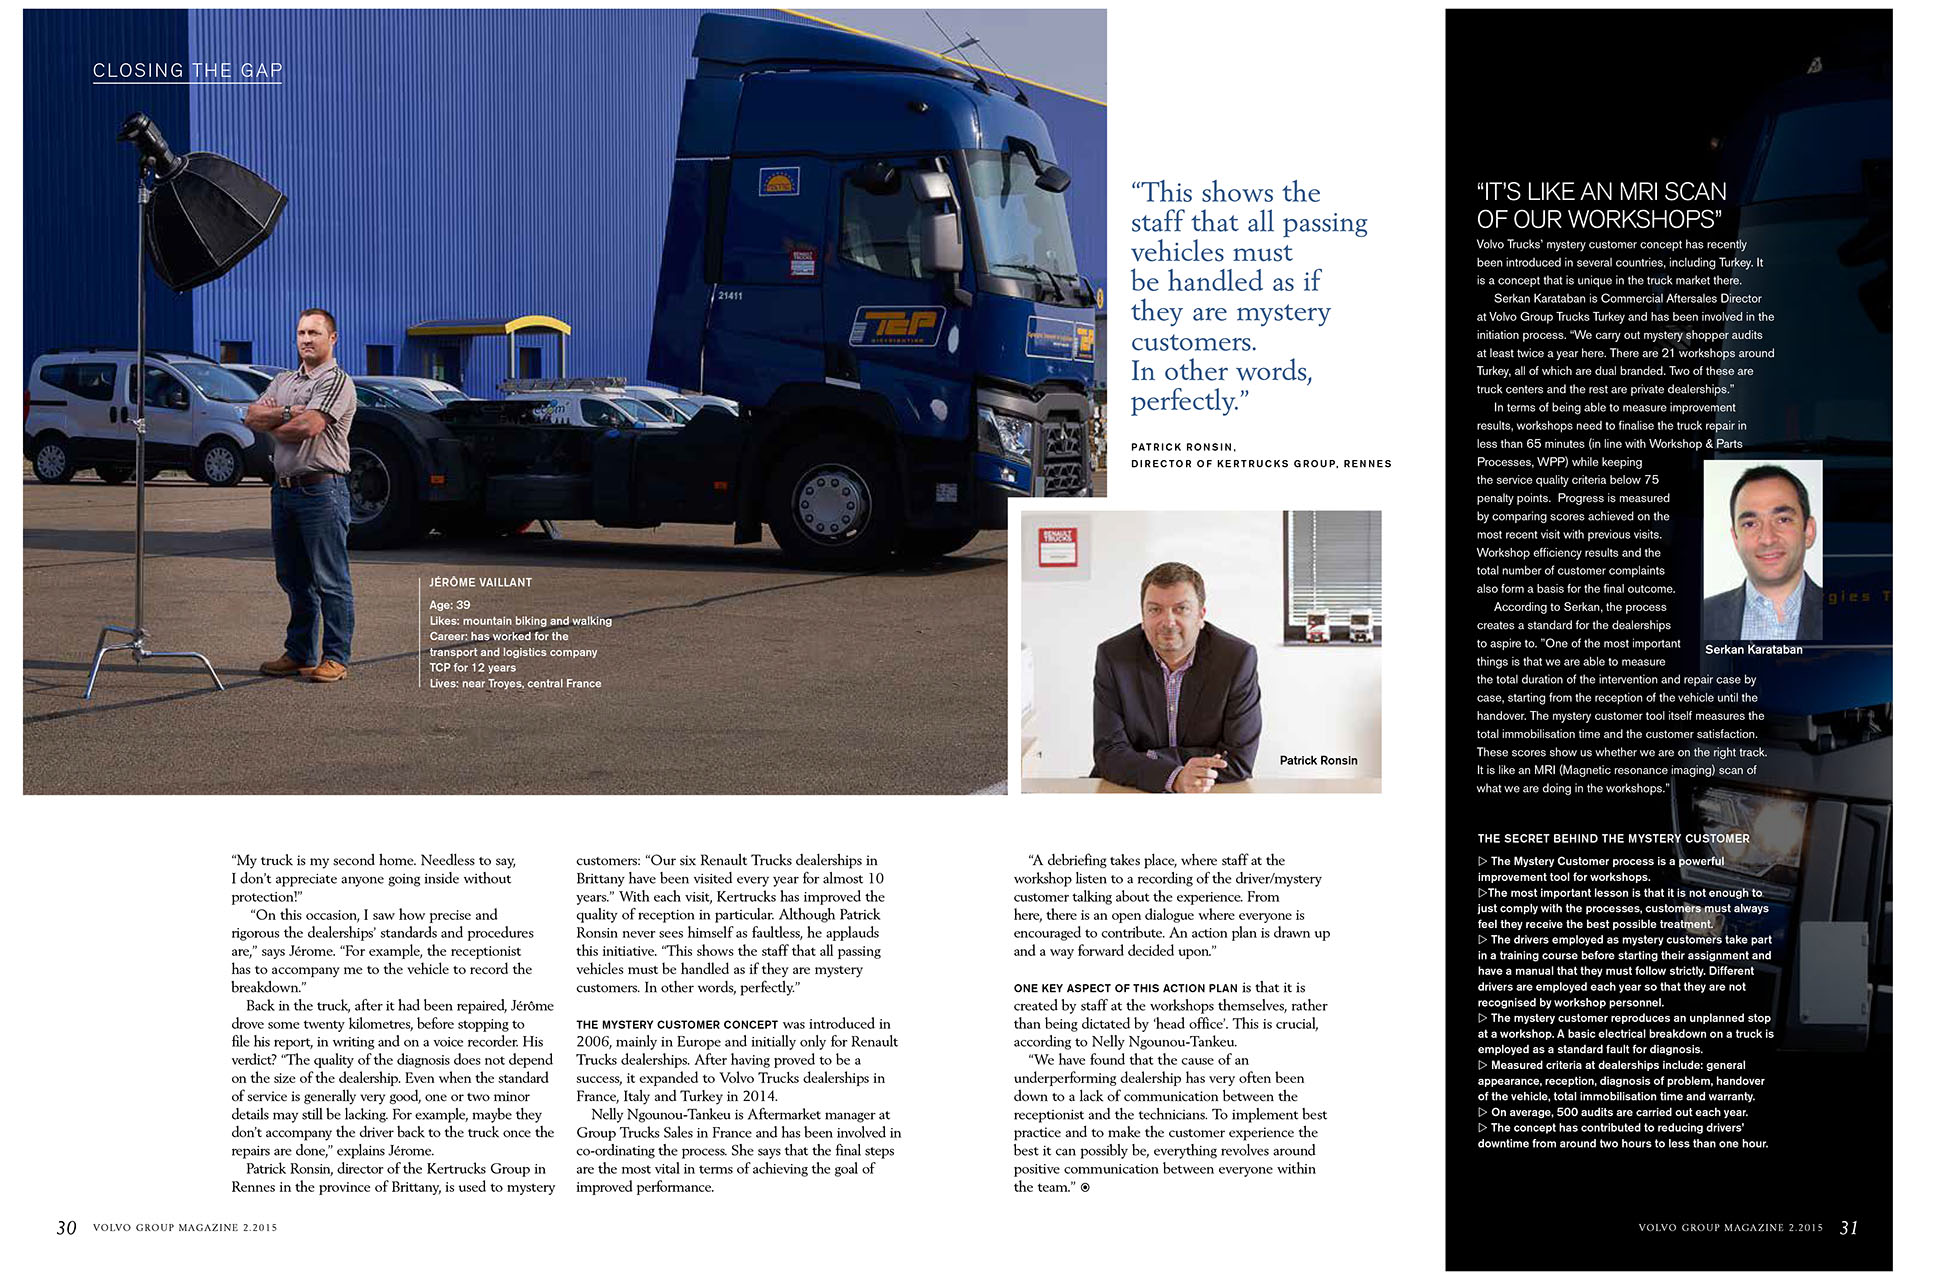 Volvo Global Magazine - The Dealerships' mystery customers